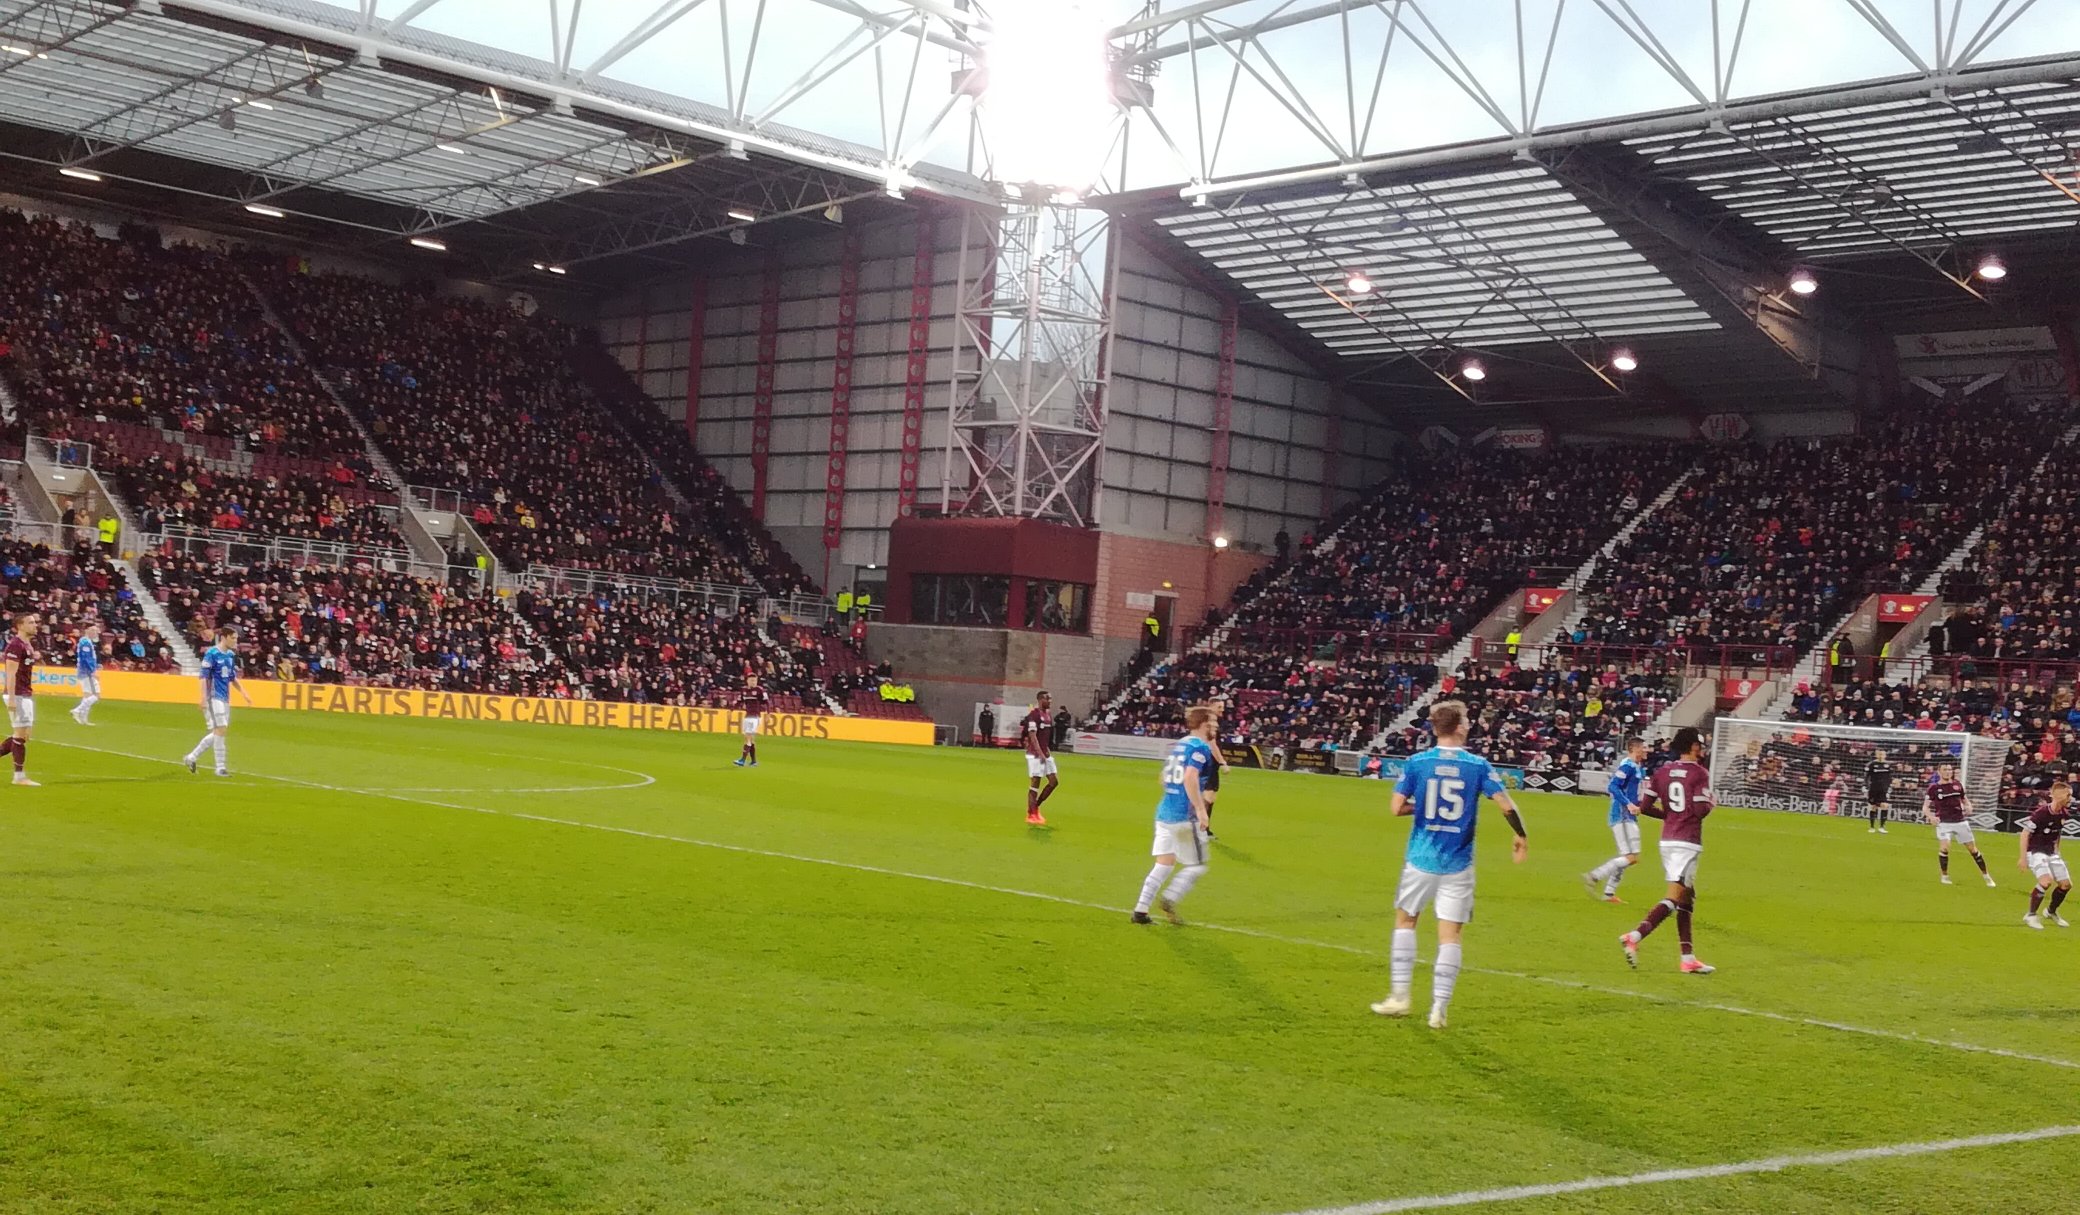 Action from Hearts v St Johnstone at Tynecastle on 26th January 2019